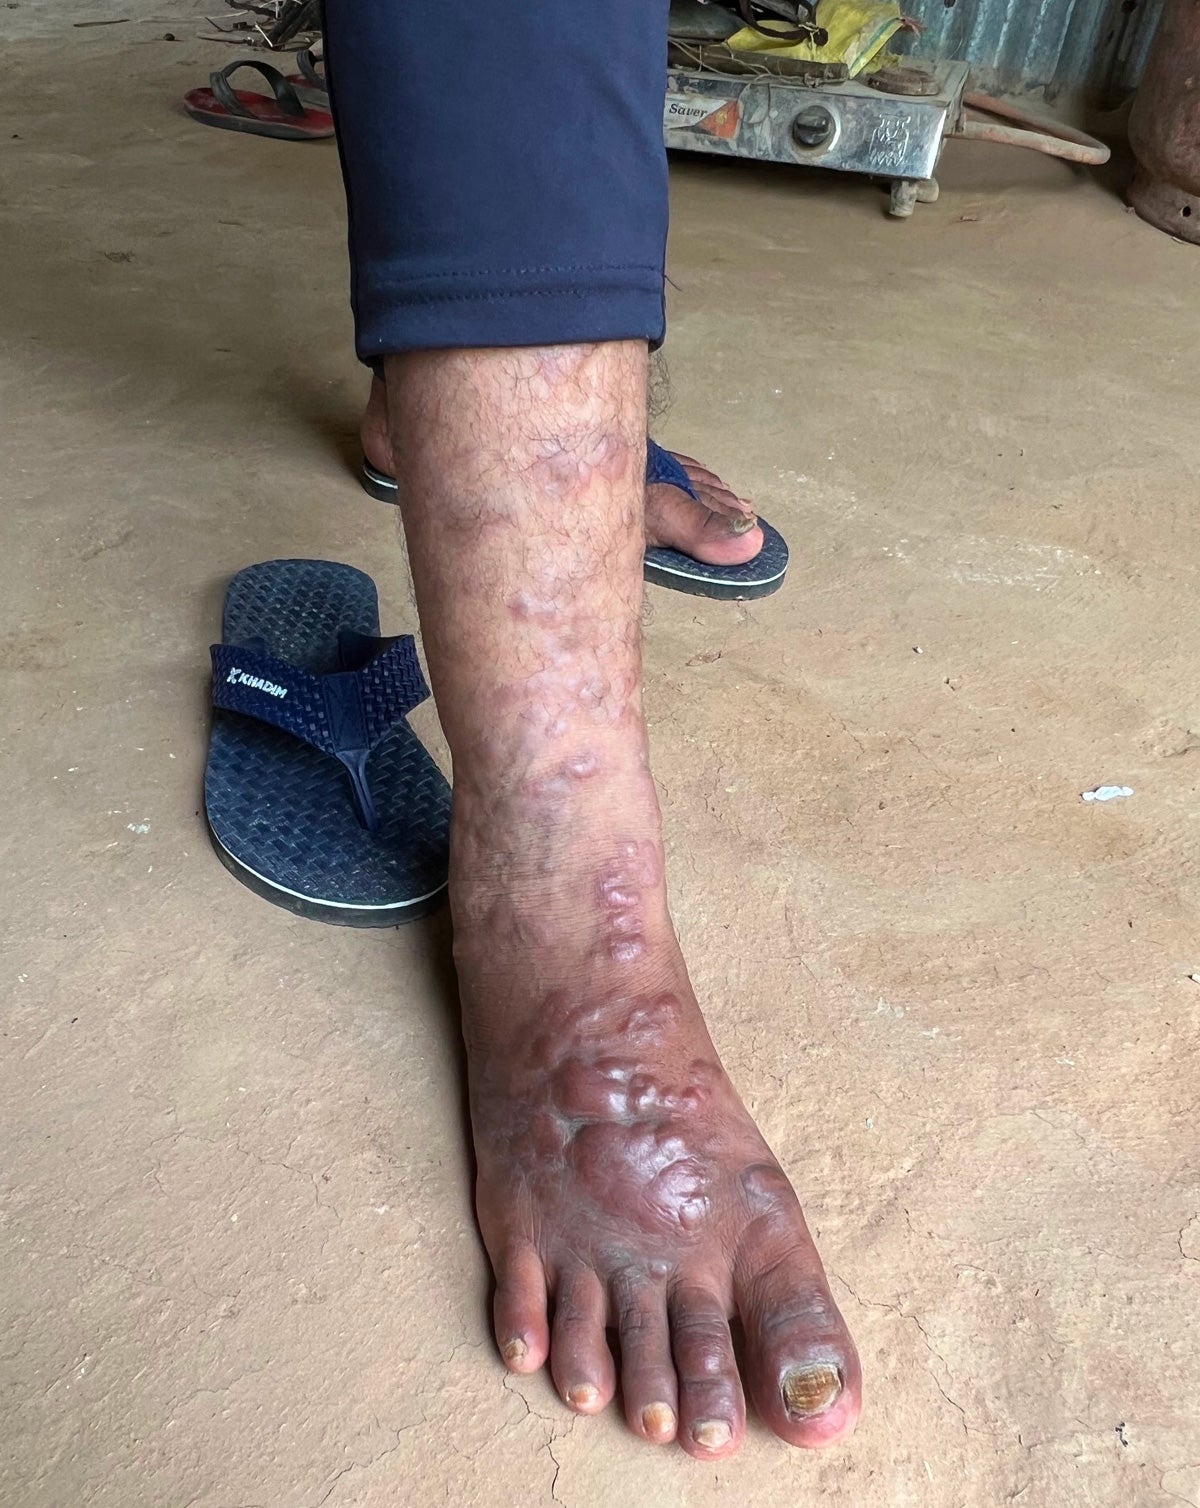 A male Indian foot and ankle with puffy pink lesions caused by post-kala-azar dermal leishmaniasis, or PKDL